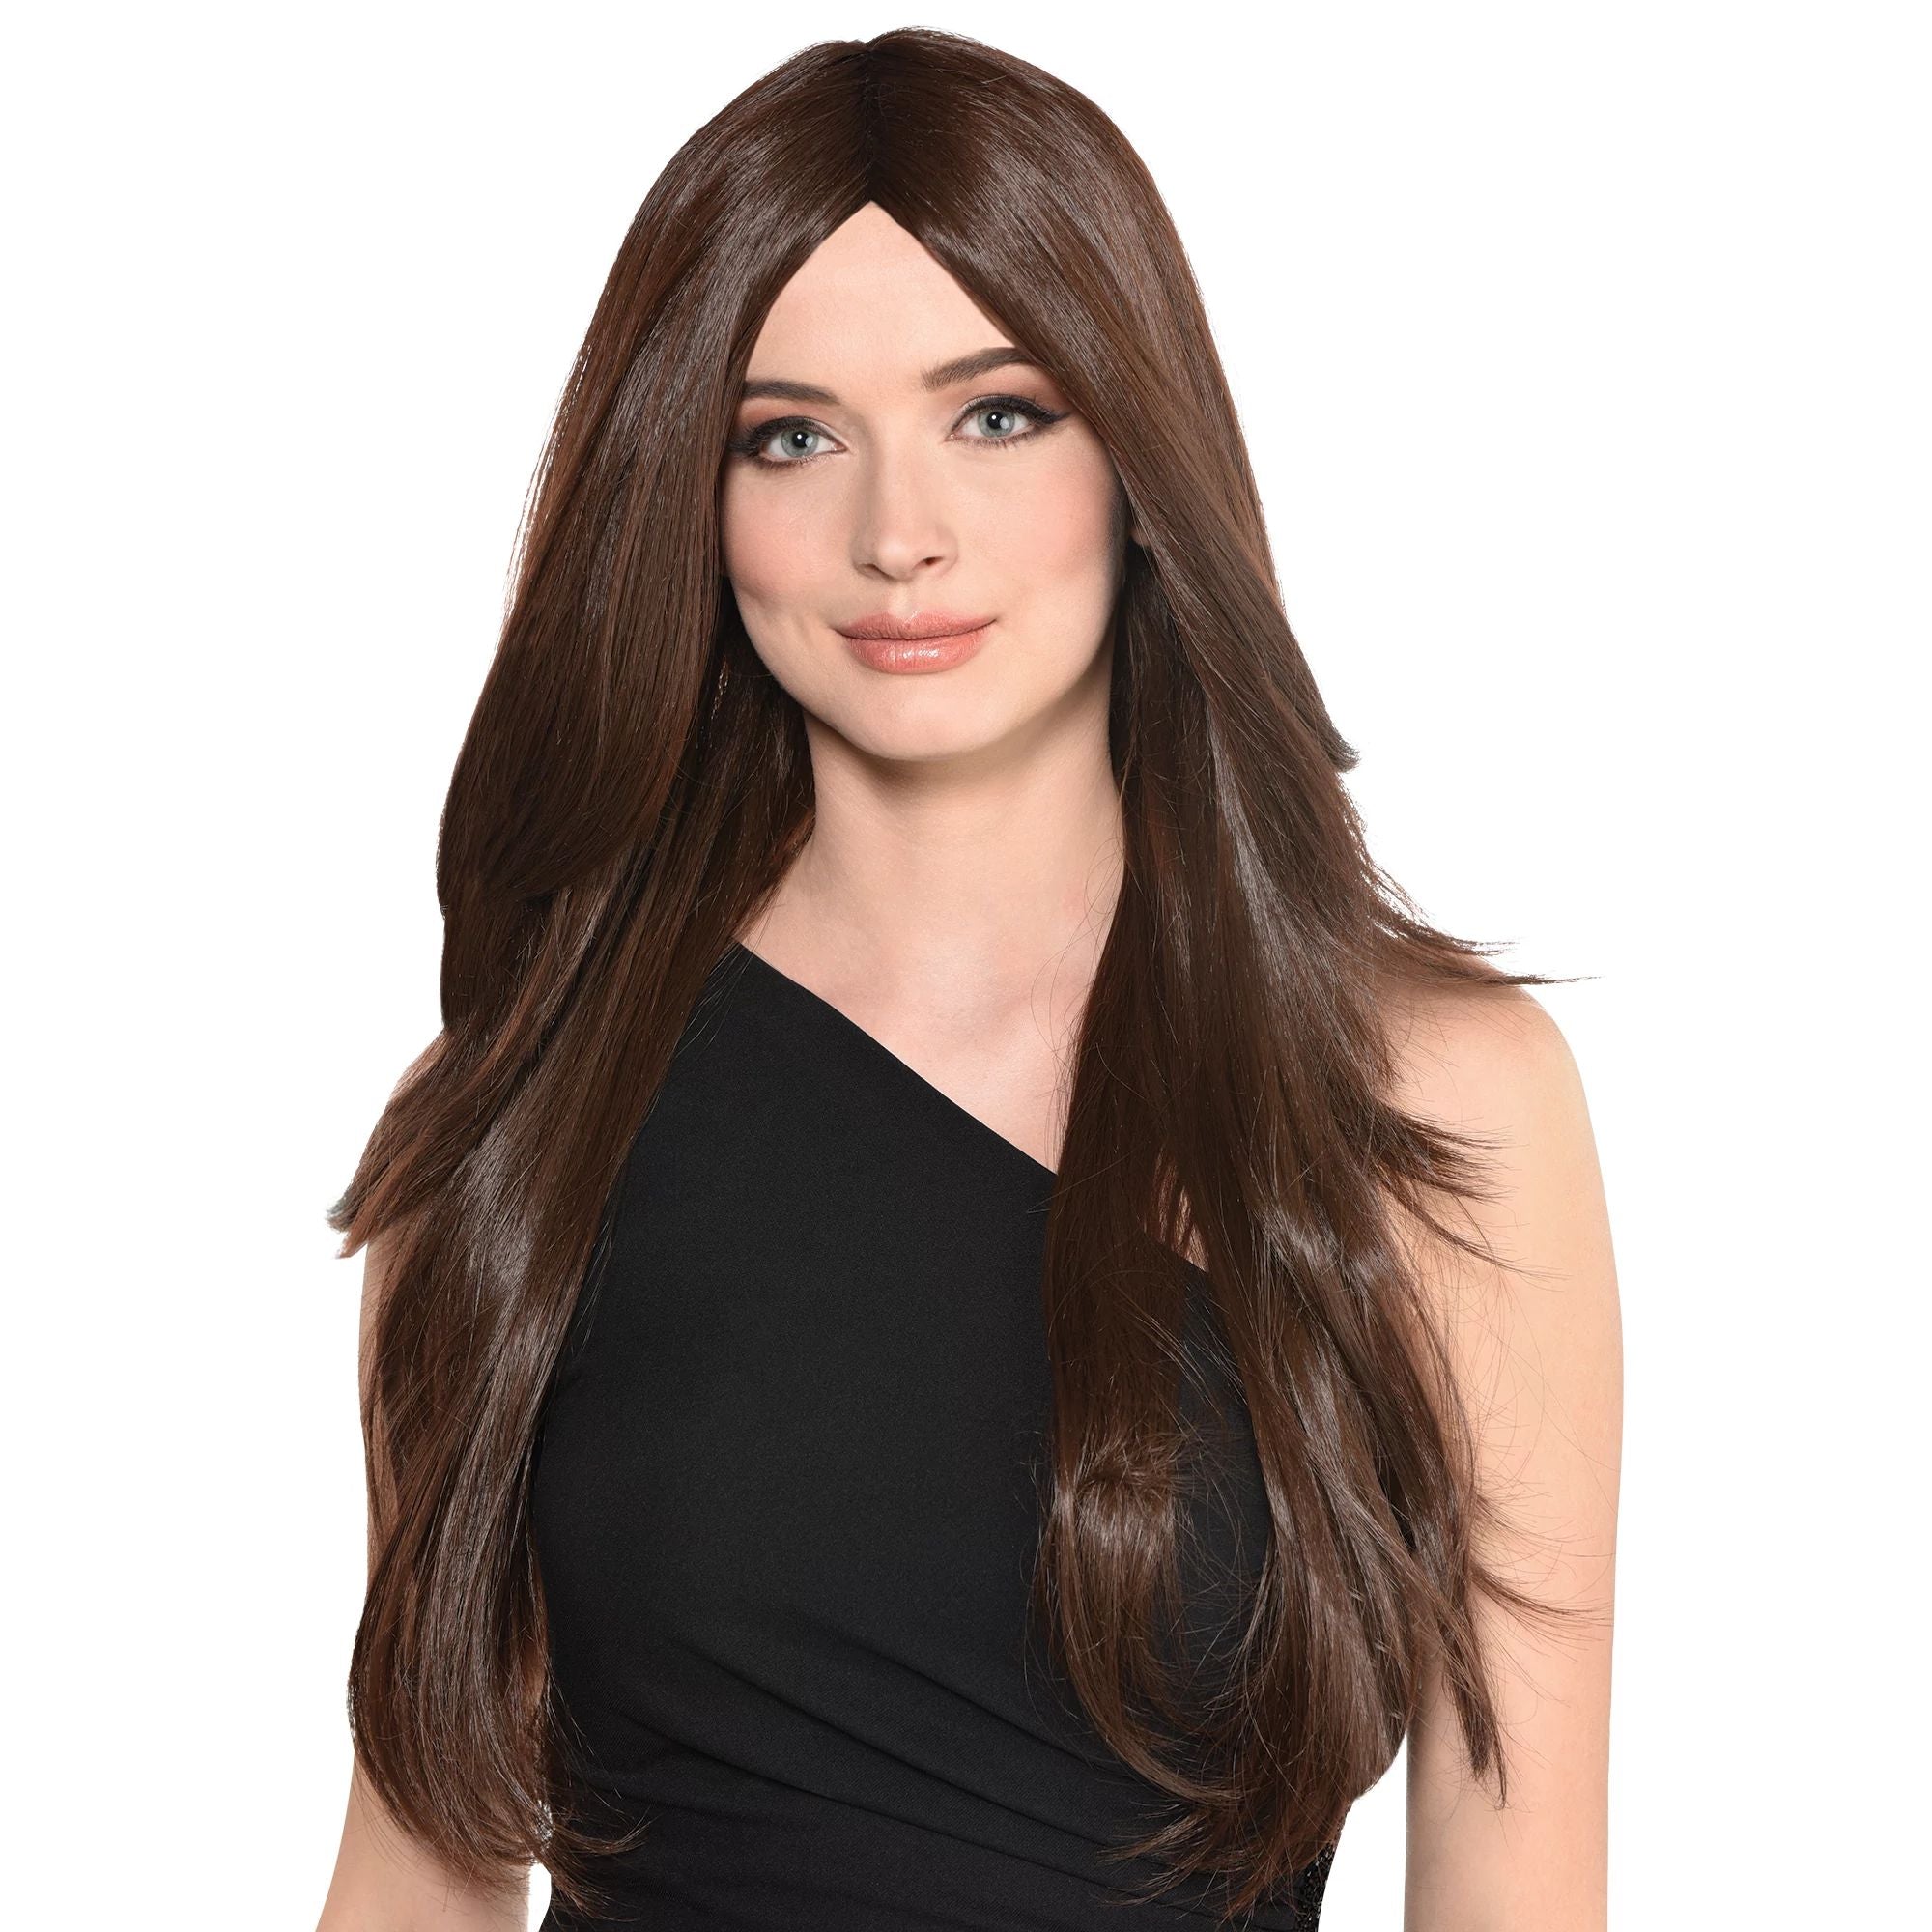 Amscan COSTUMES: WIGS Hot Honey Chestnut Brown Wig